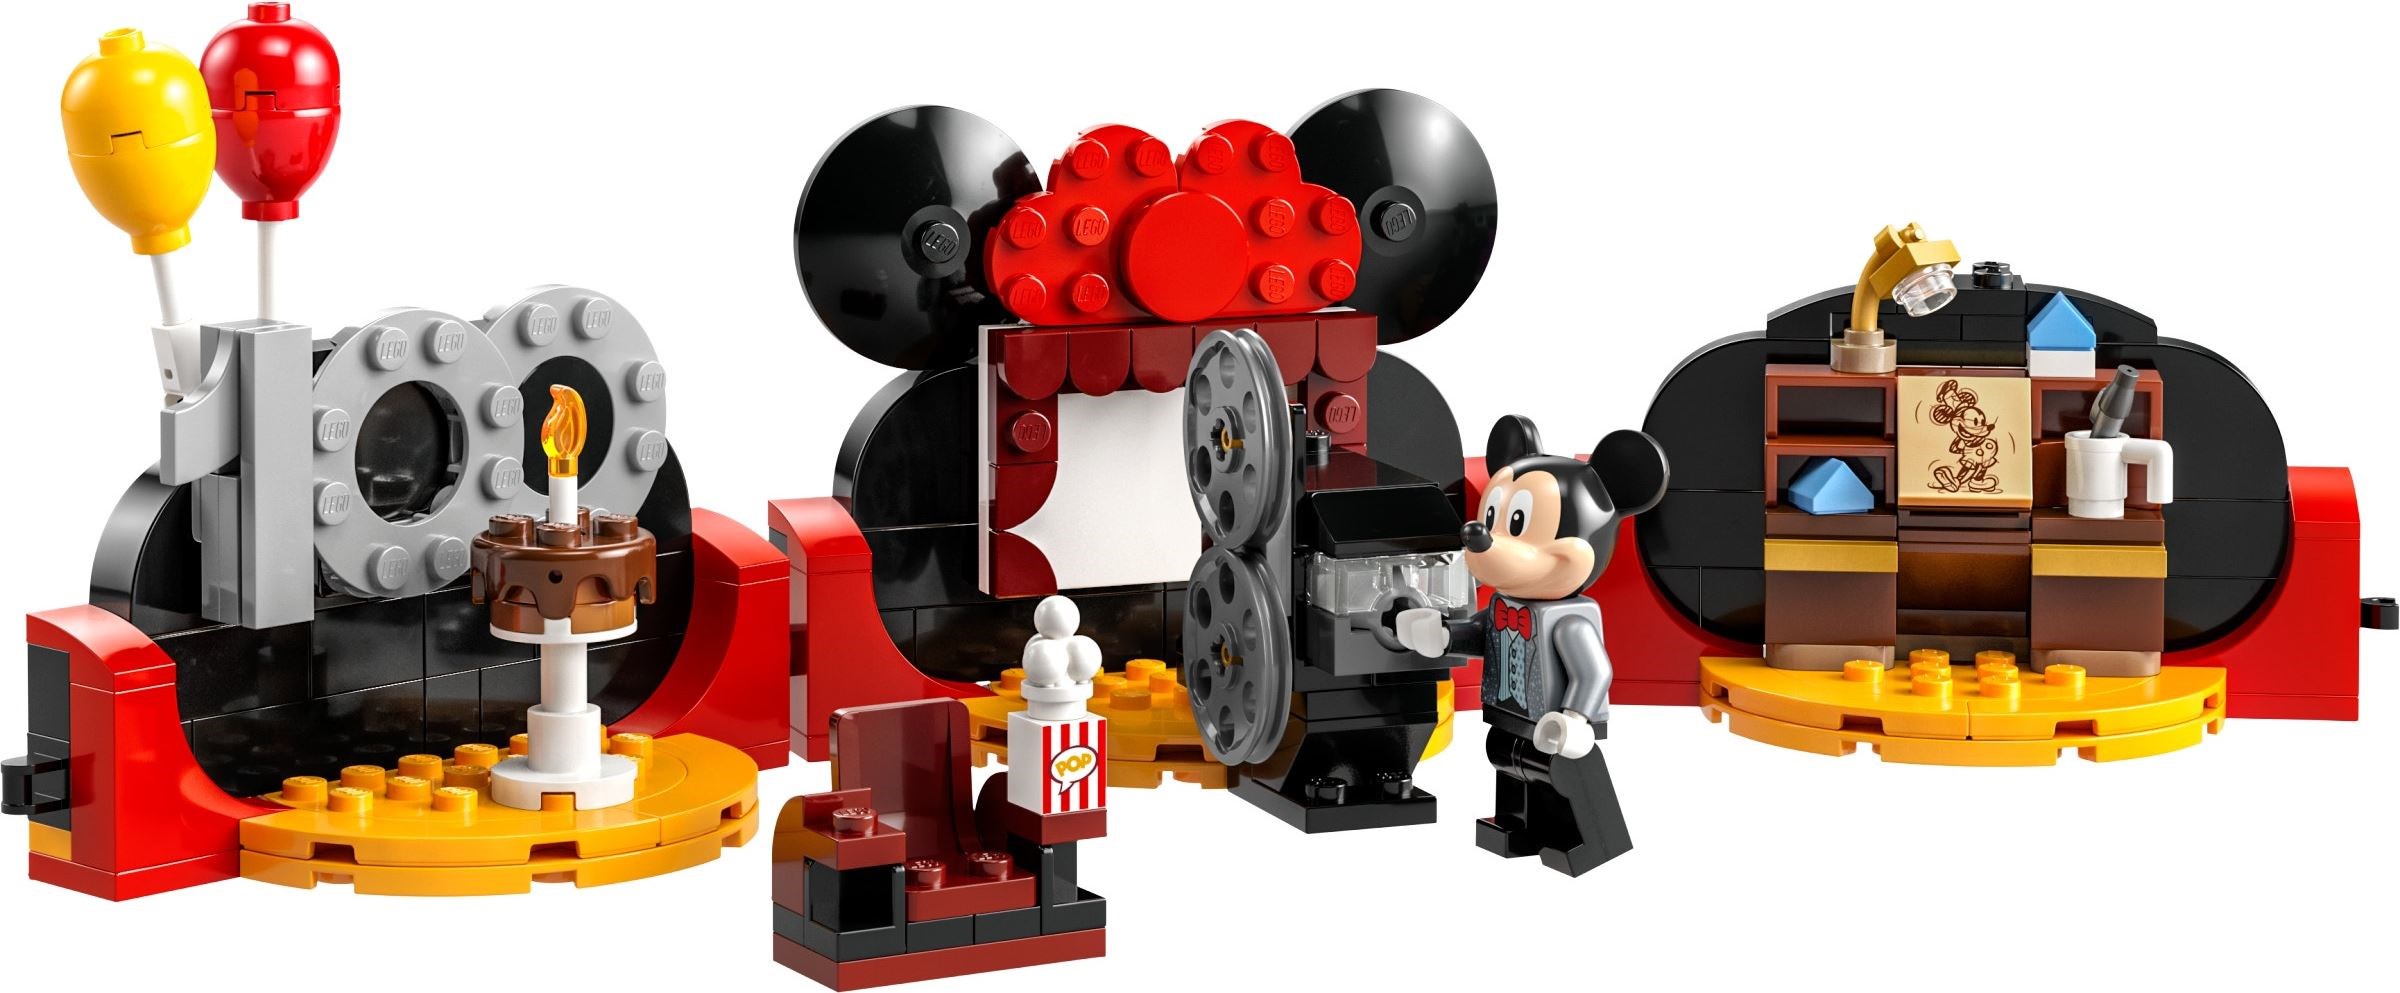 LEGO IDEAS - 100 years of fairytales! - Stitch's Spaceship: The Red One